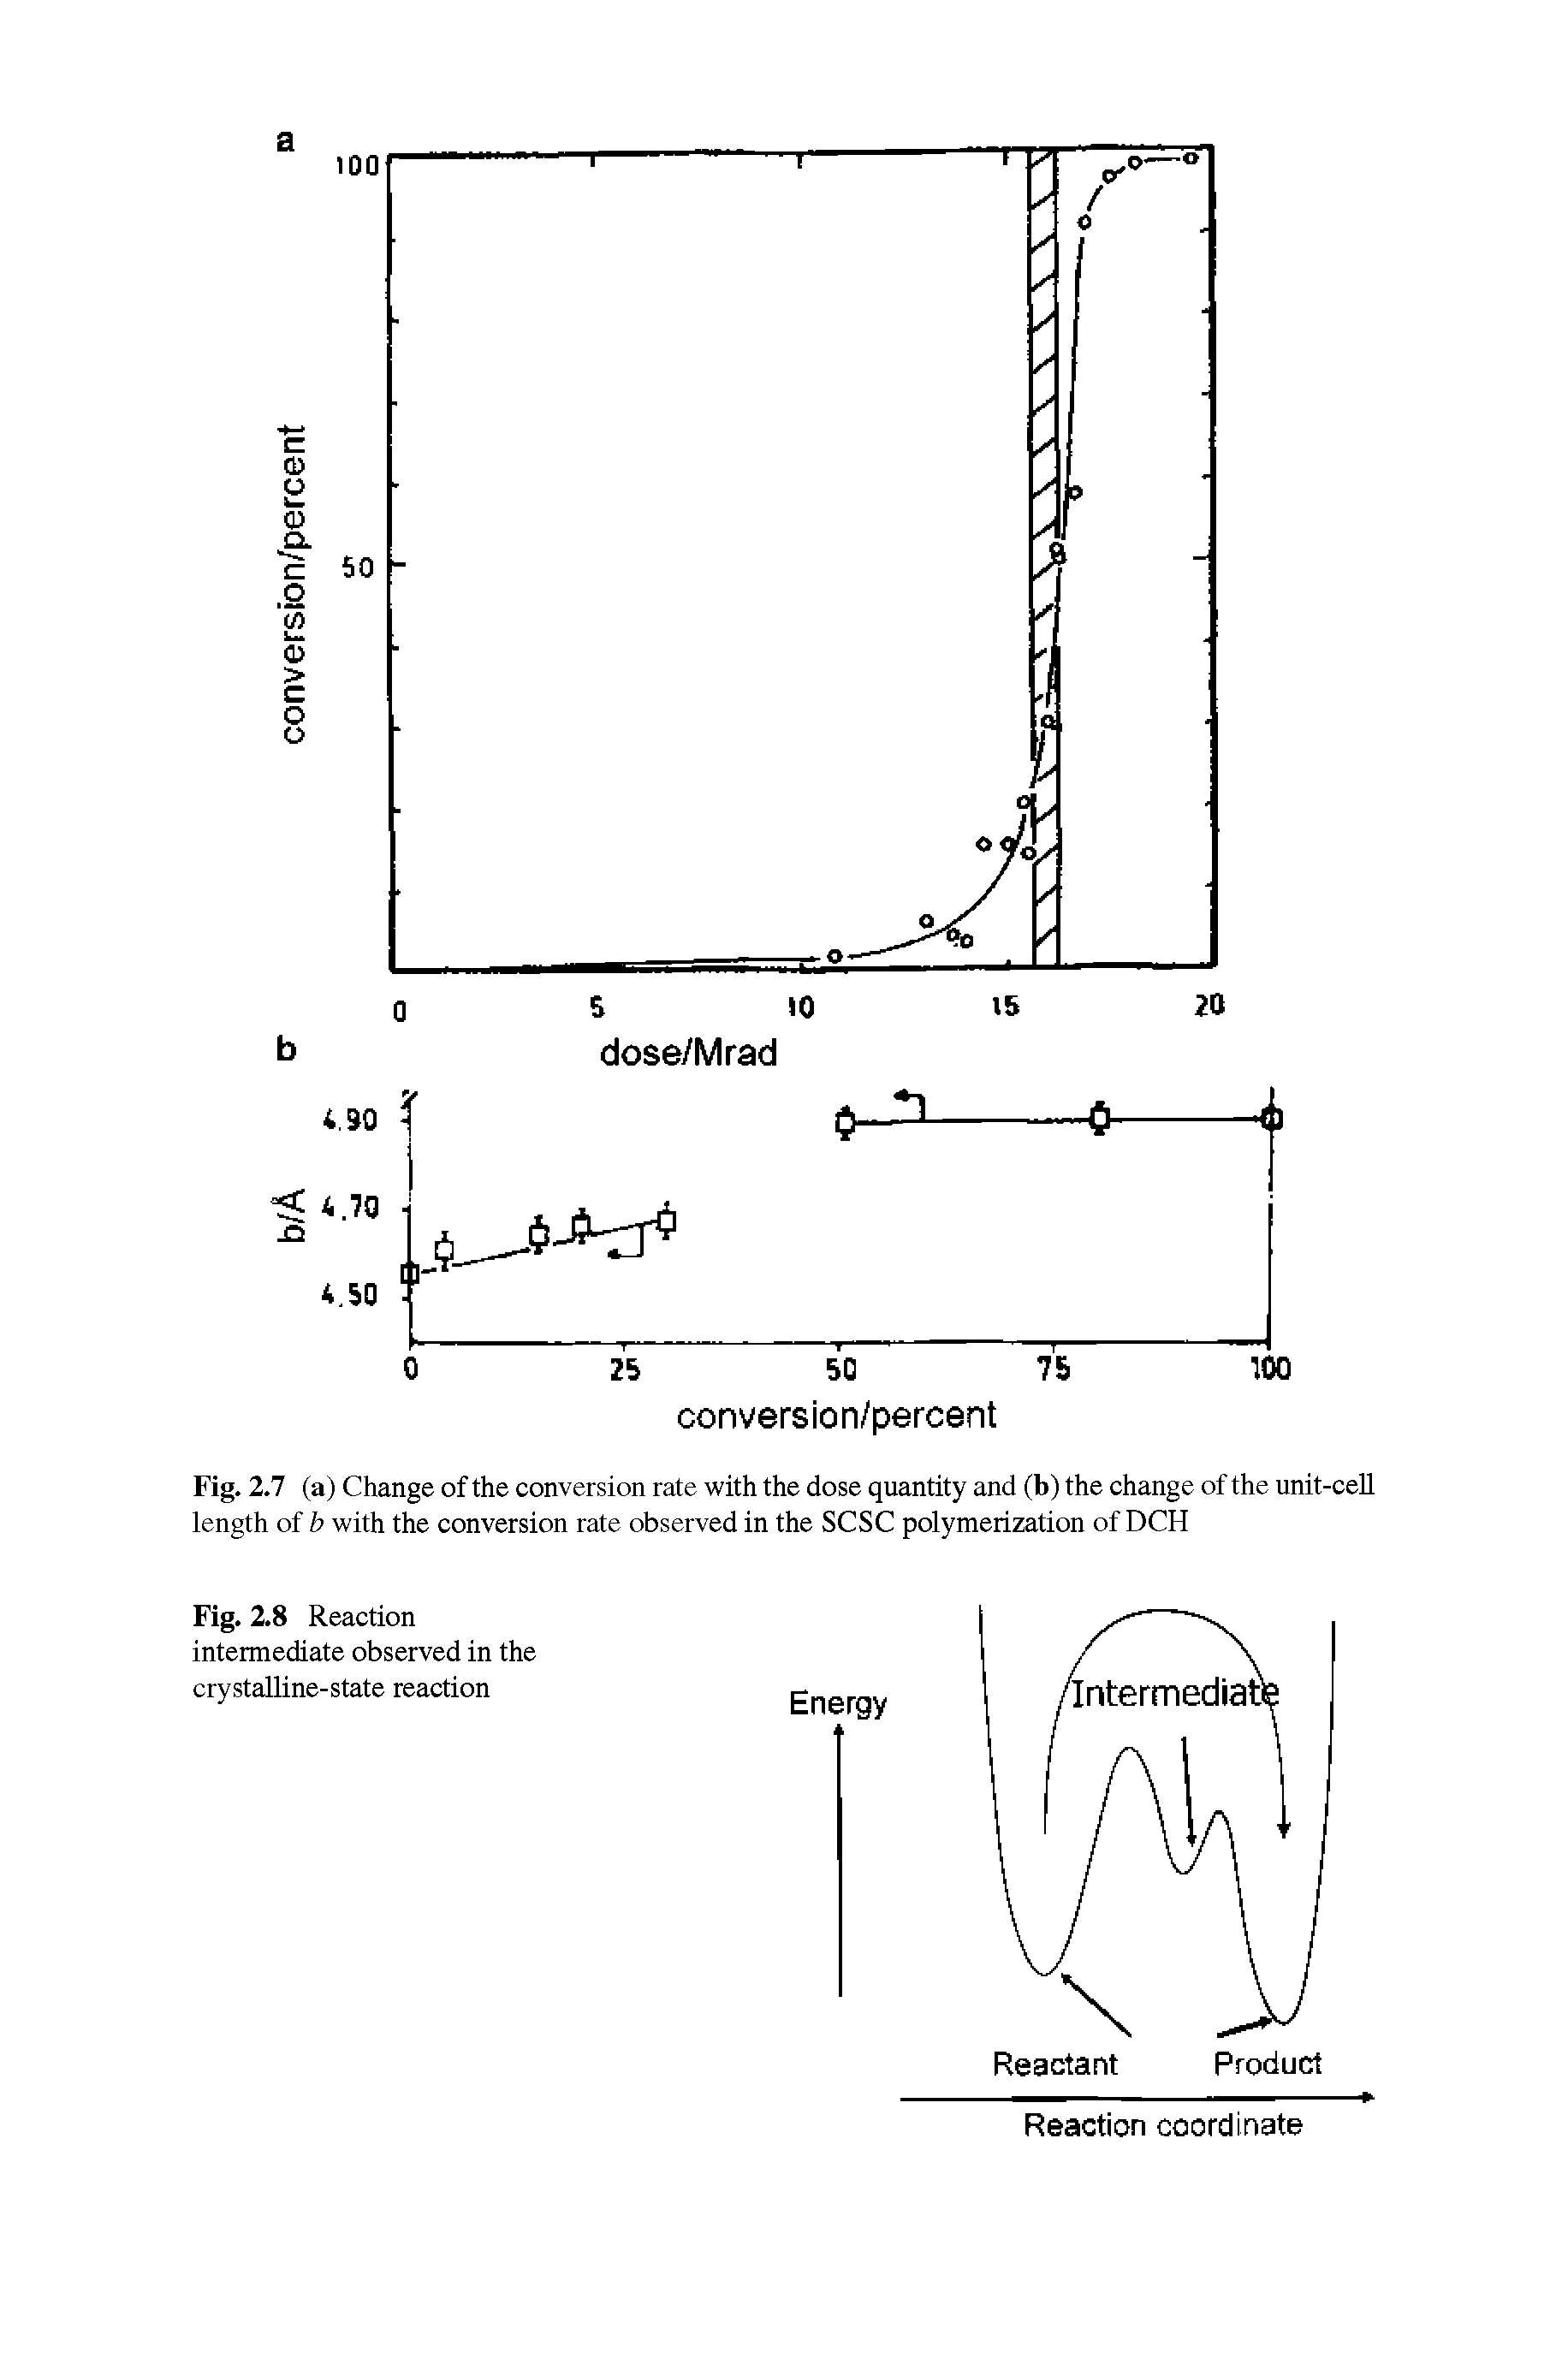 Fig. 2.8 Reaction intermediate observed in the crystalline-state reaction...